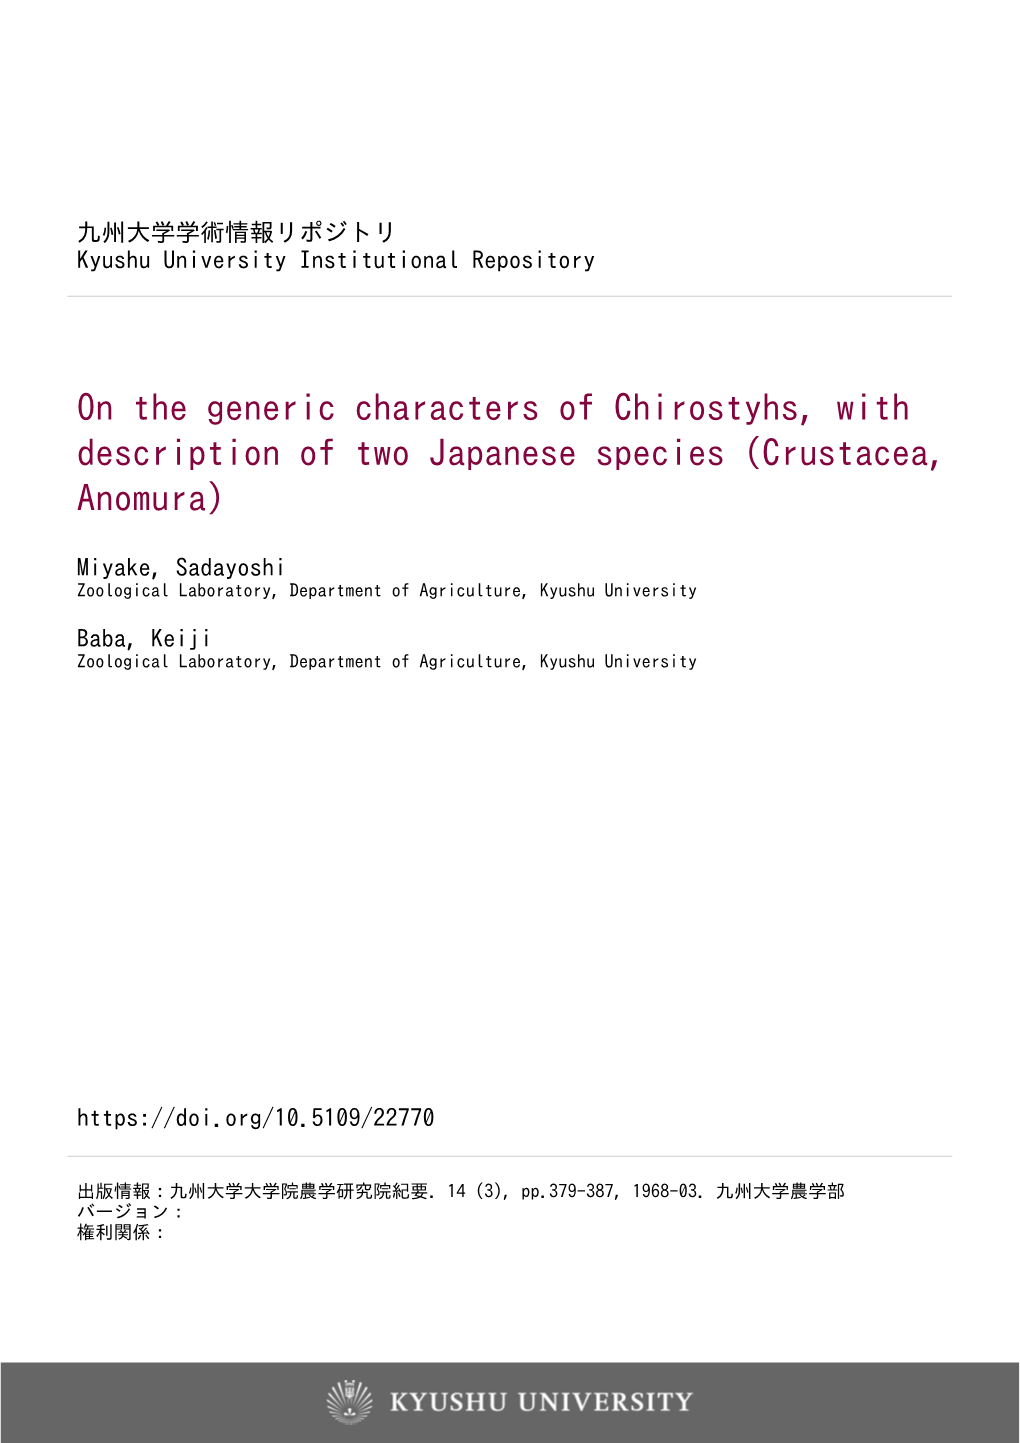 On the Generic Characters of Chirostyhs, with Description of Two Japanese Species (Crustacea, Anomura)